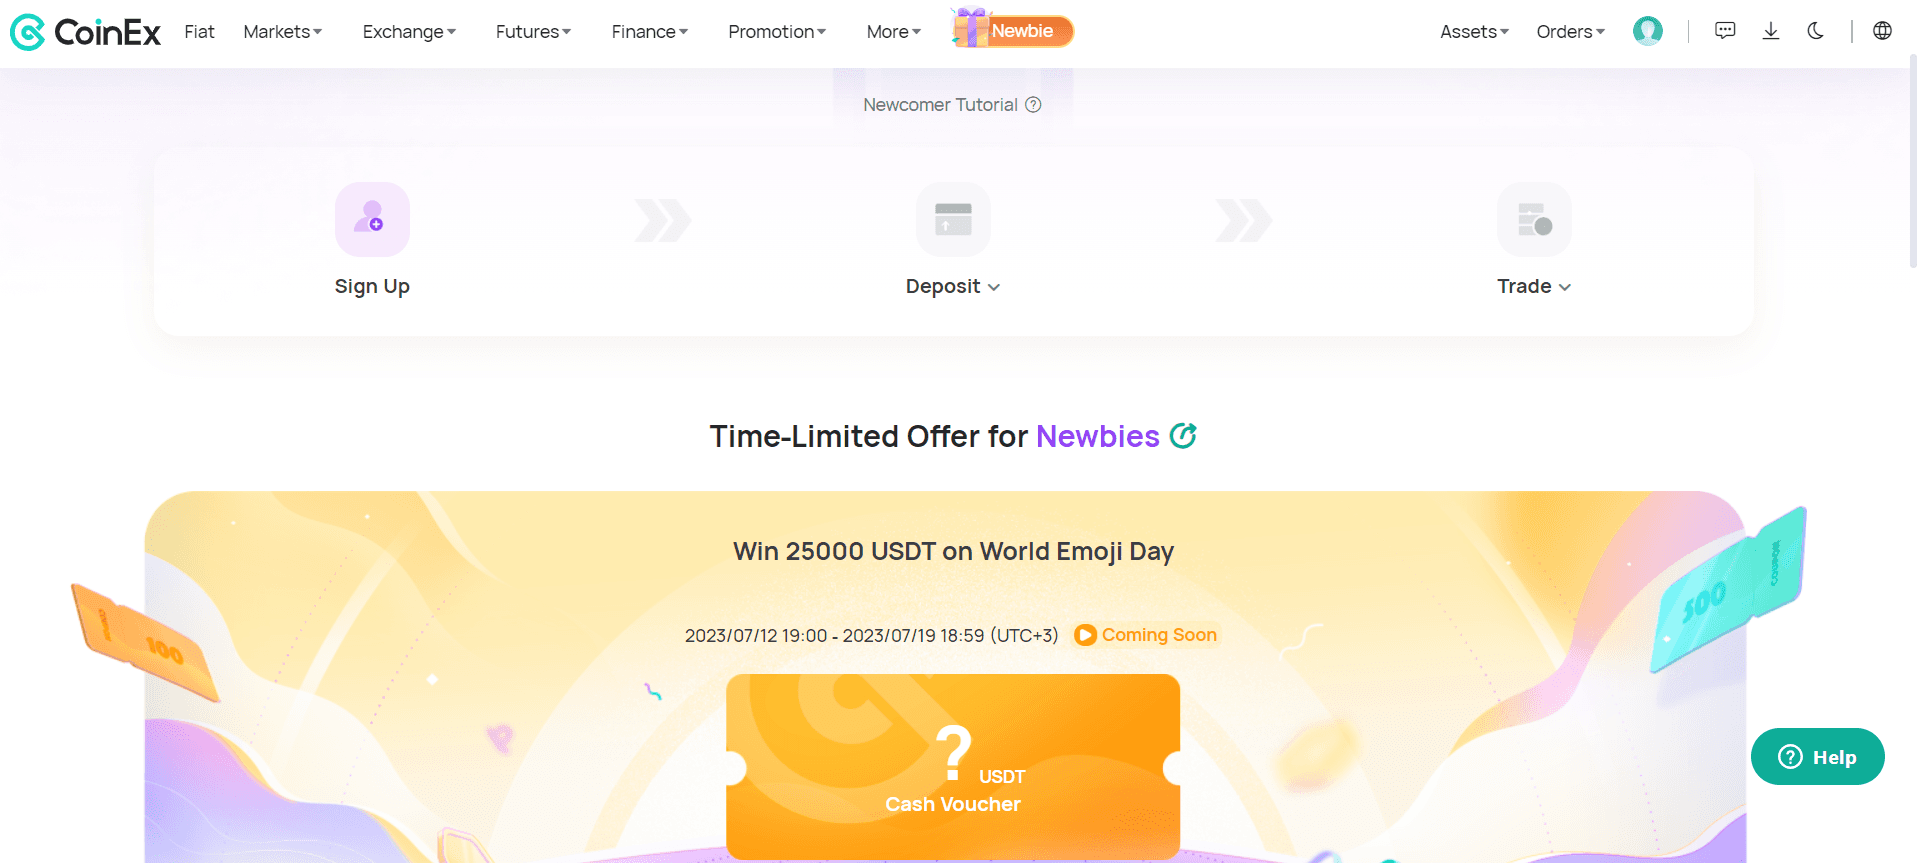 Image of CoinEx rewards page